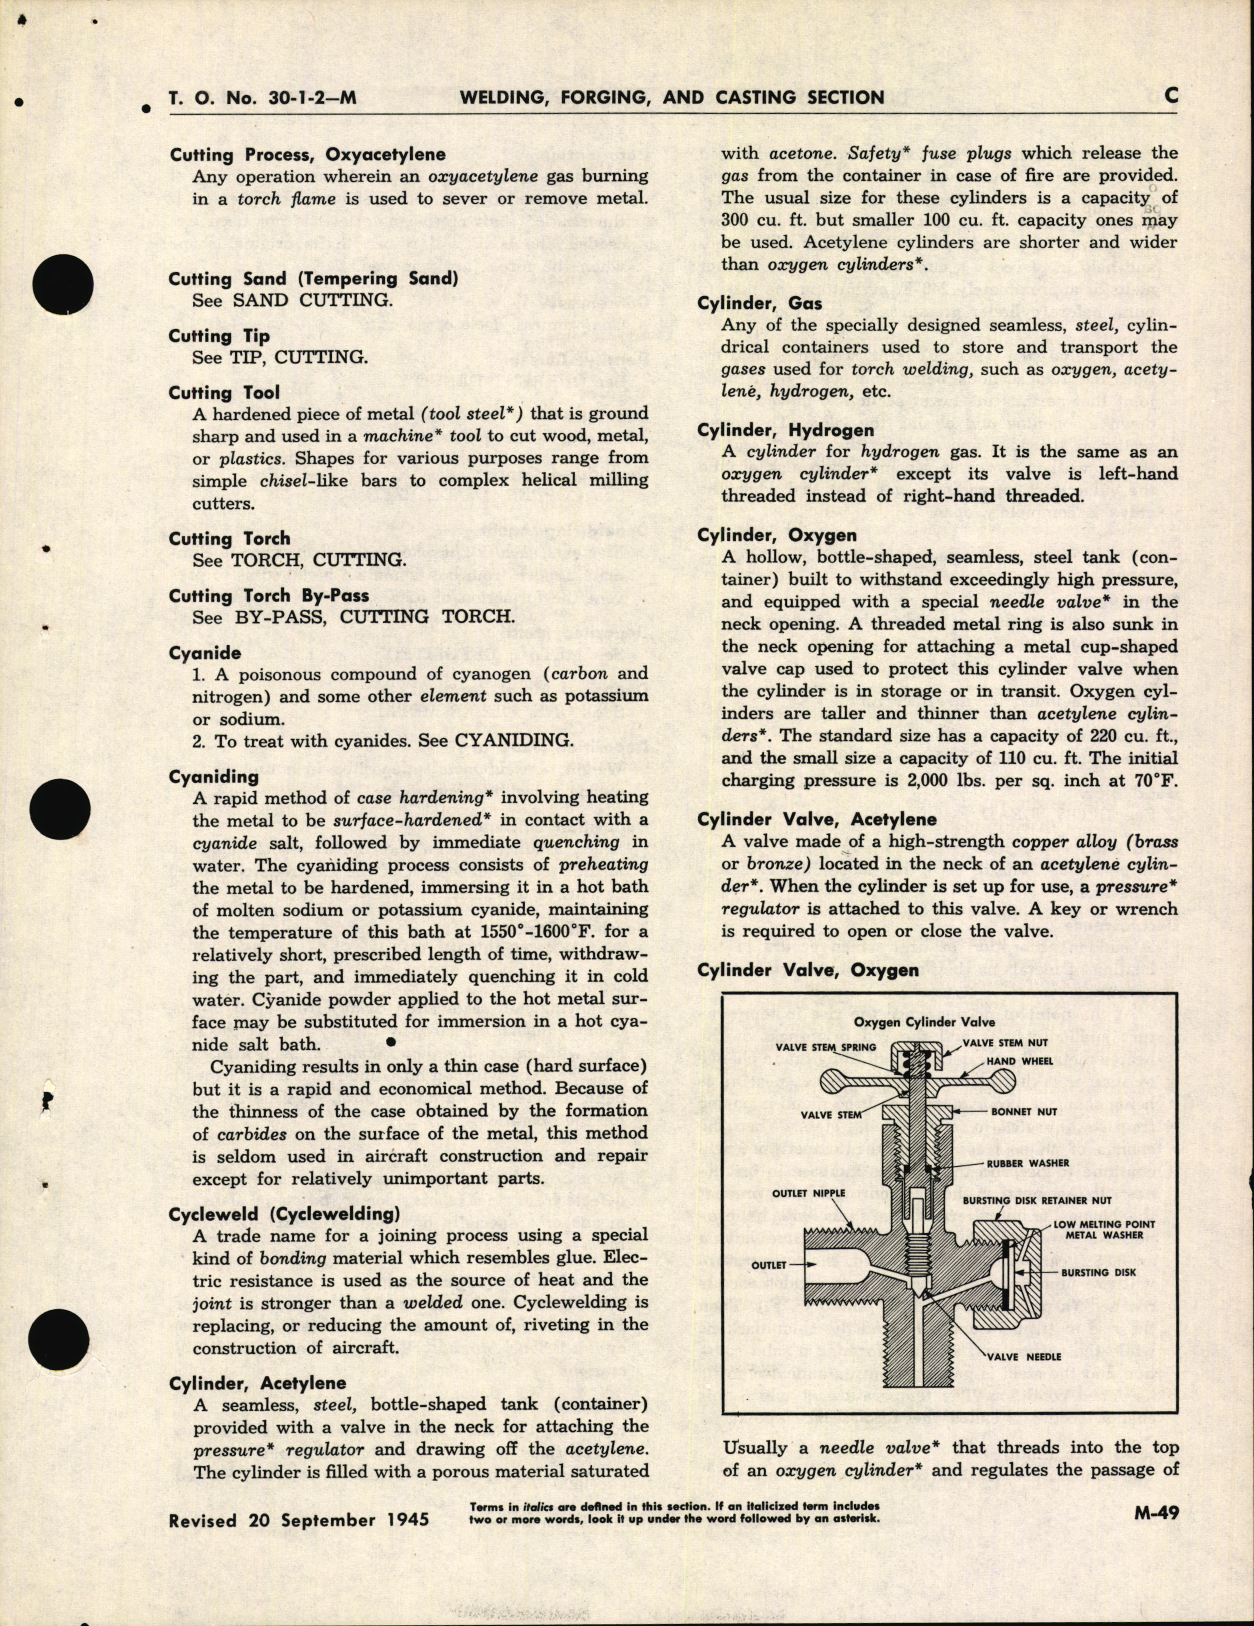 Sample page 7 from AirCorps Library document: Dictionary of Aircraft Maintenance terms; Section M Welding, Forging and Casting Section